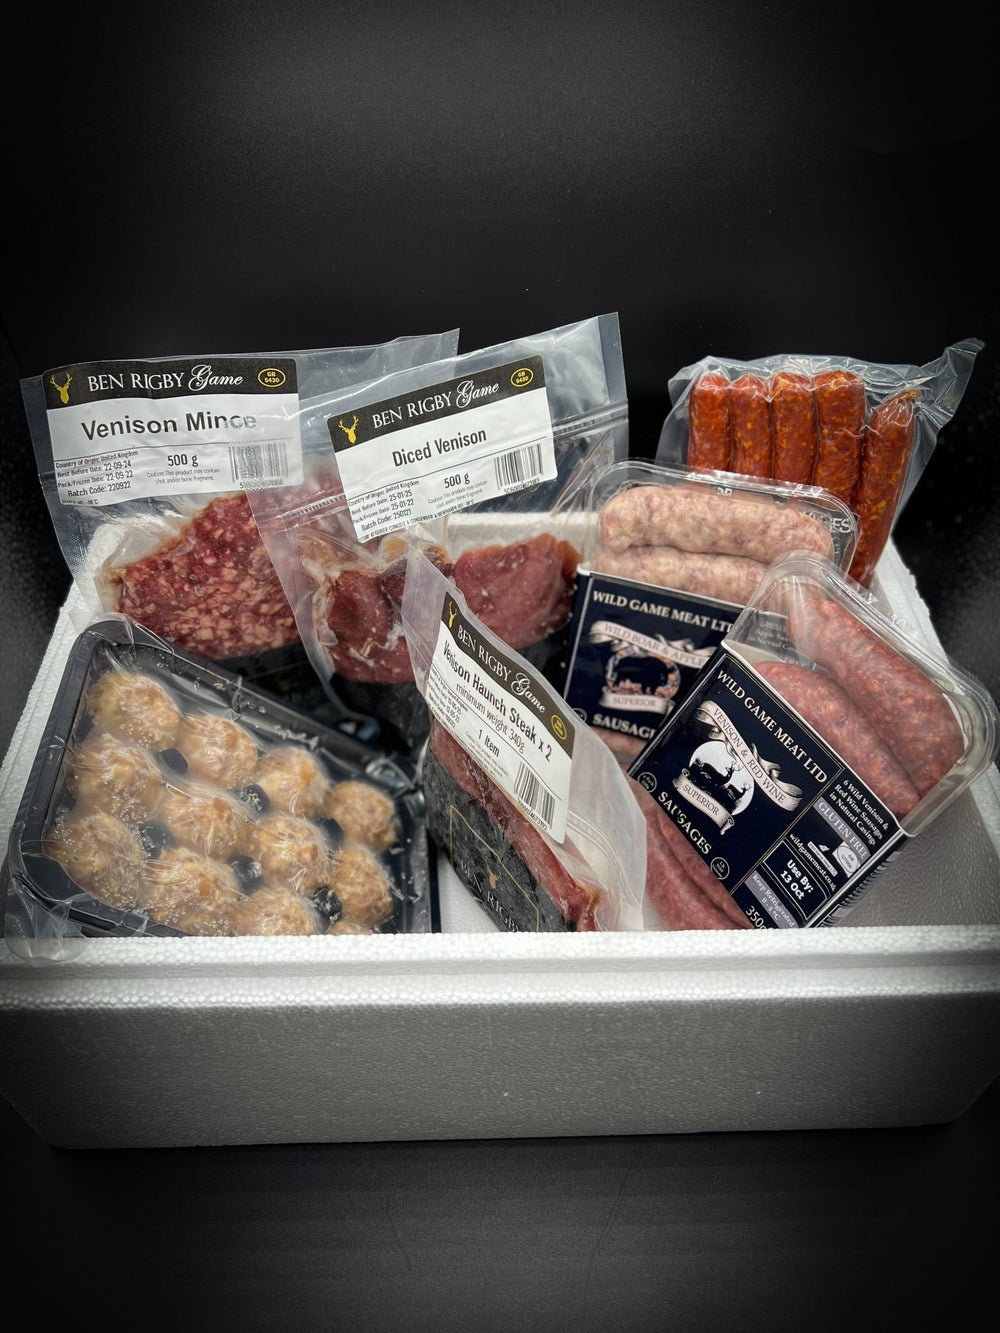 7 Meals in one Box - Subscription Box - Wild Game Meat Ltd